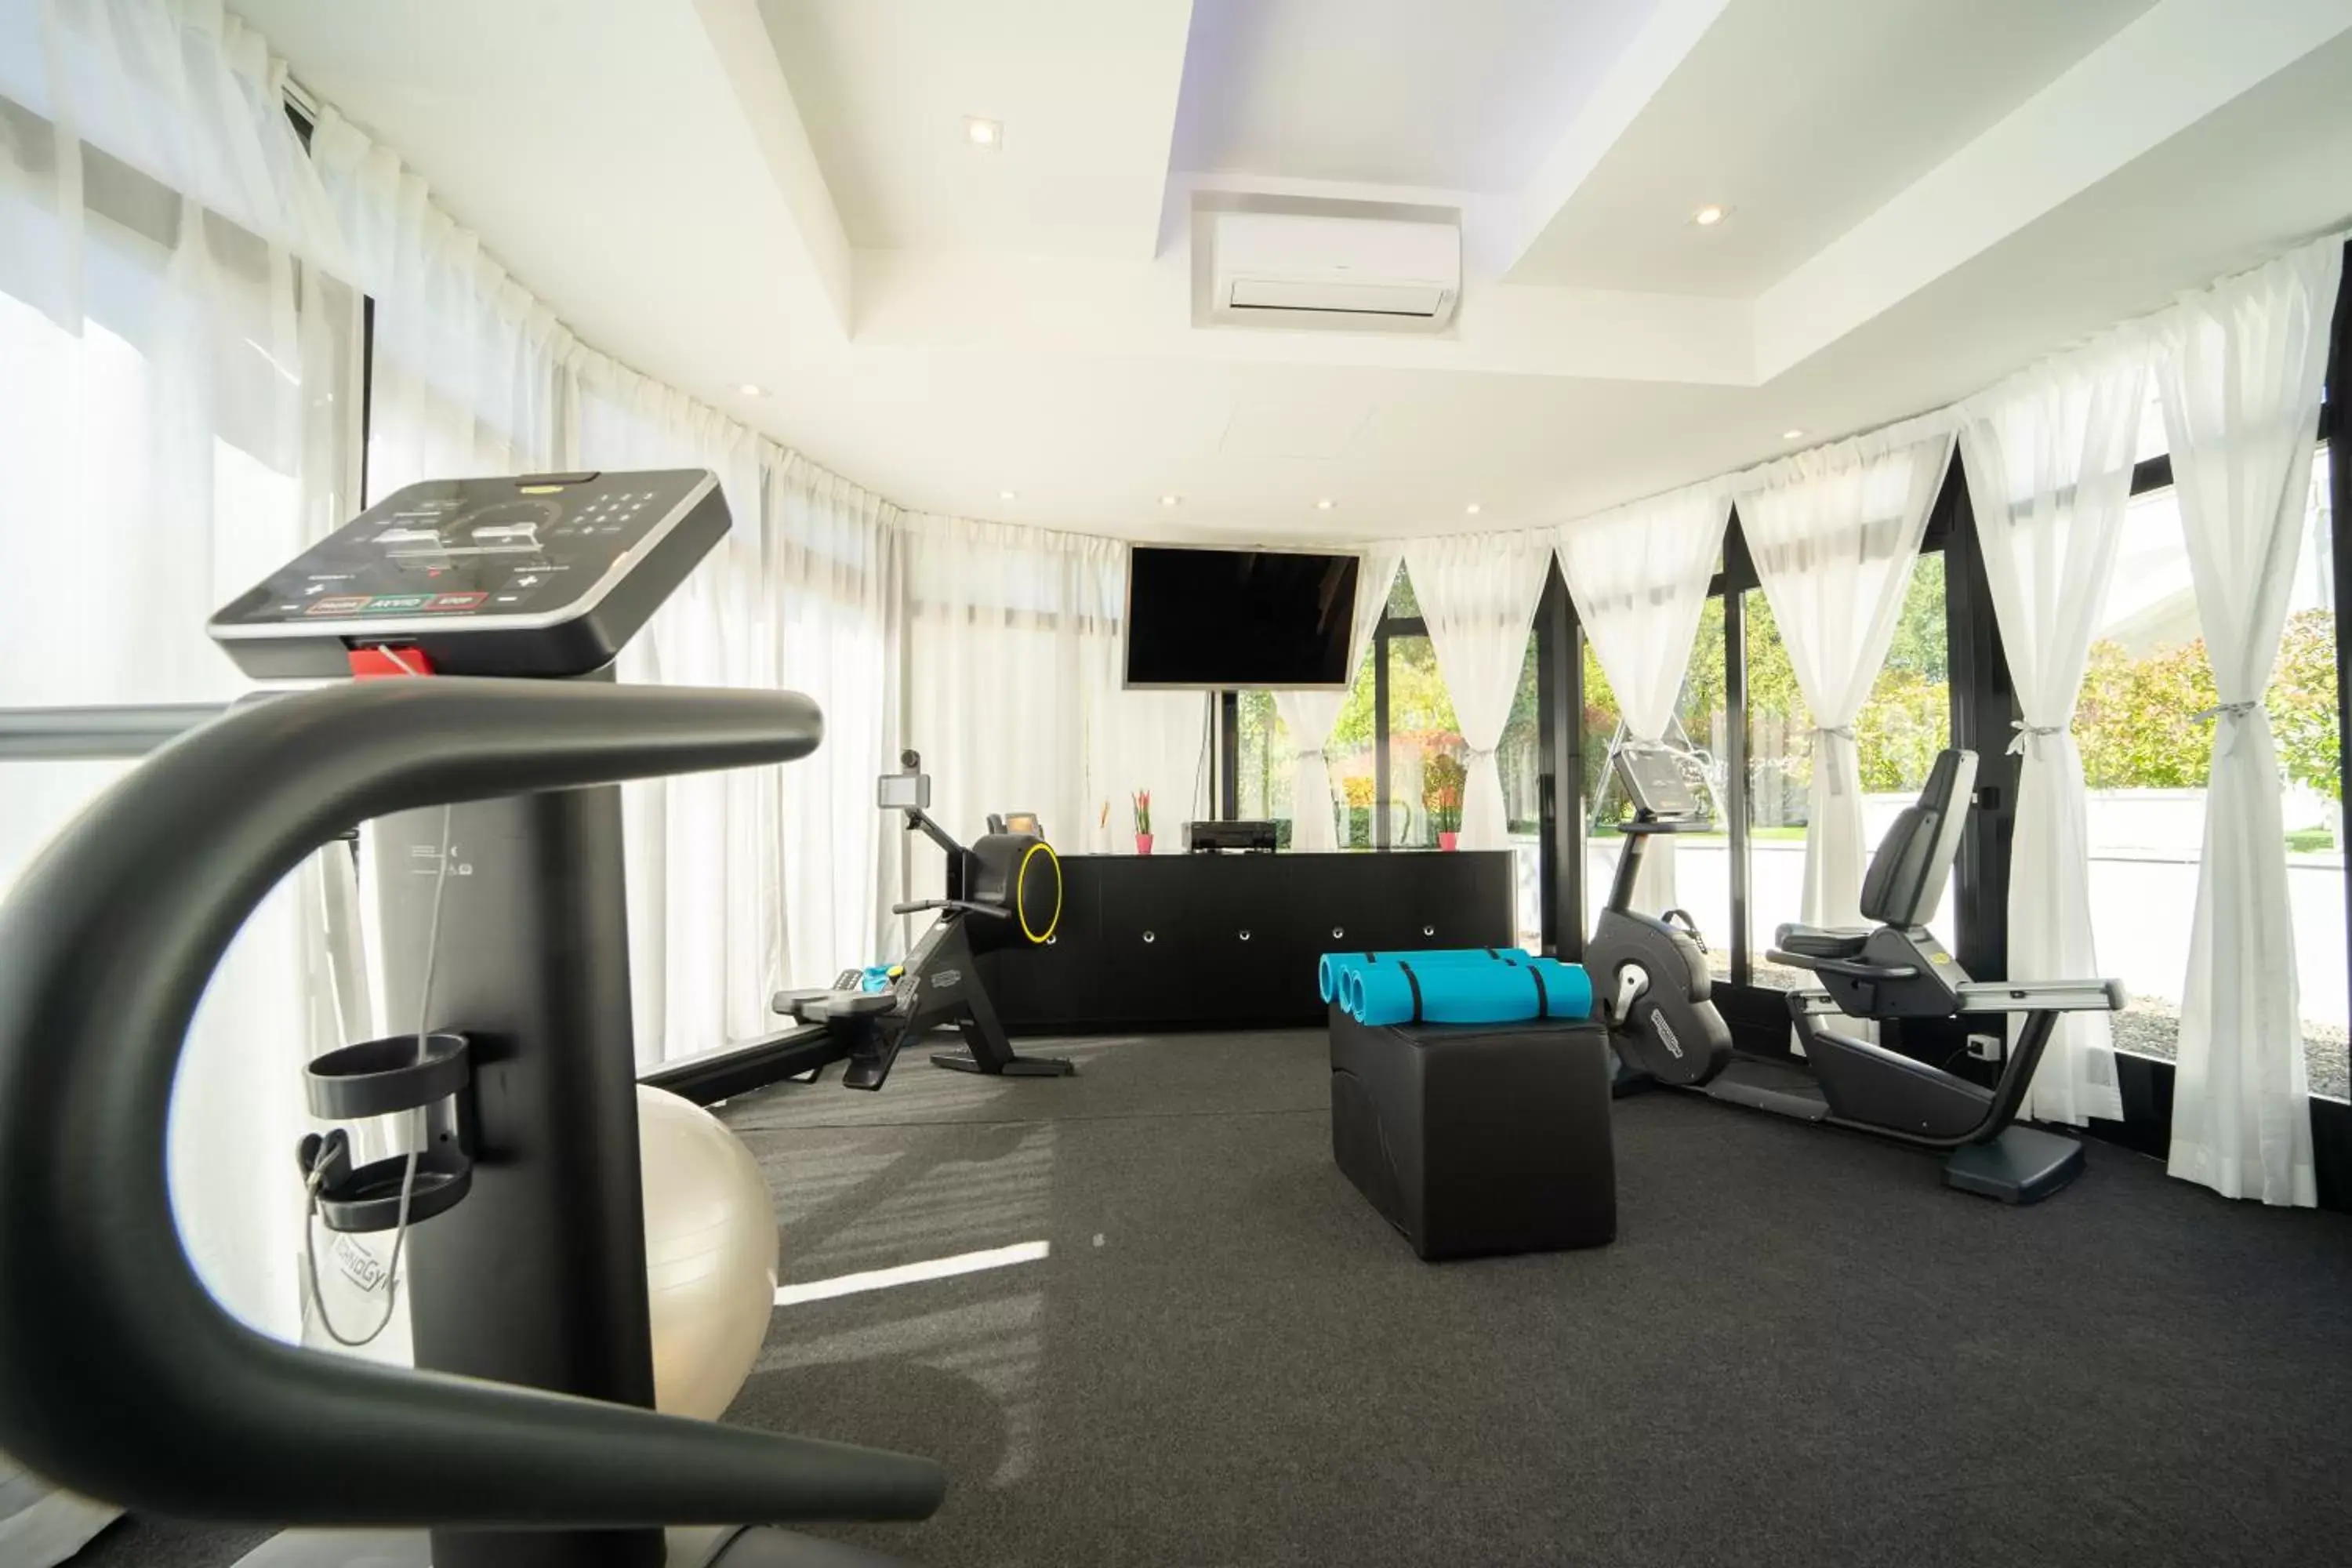 Fitness centre/facilities, Fitness Center/Facilities in iConic Wellness Resort